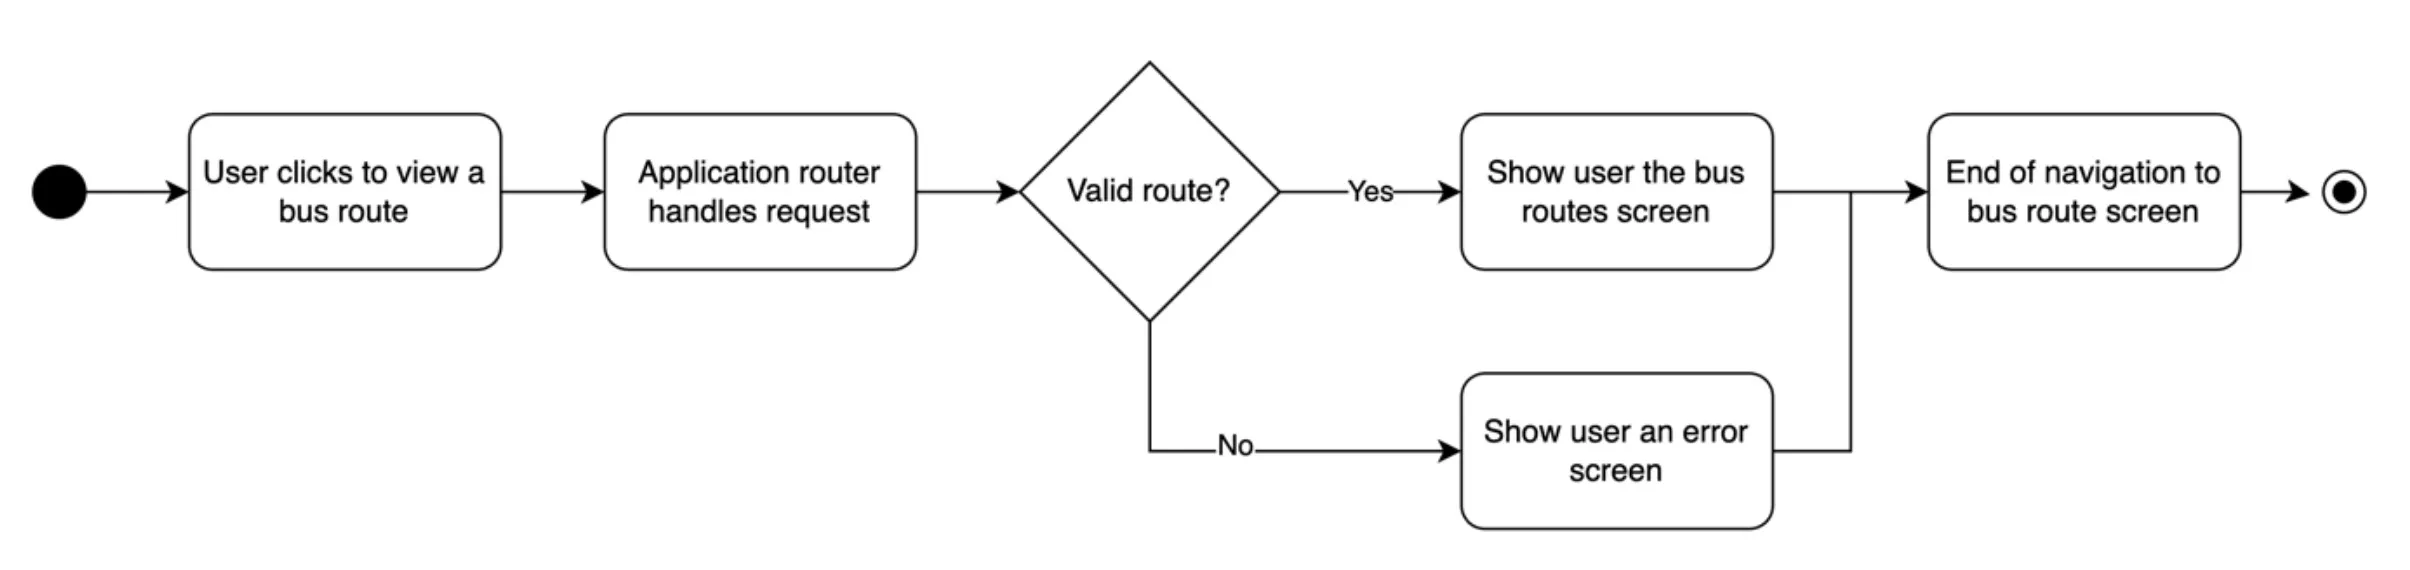 UML activity diagram for a mobile applications route screen